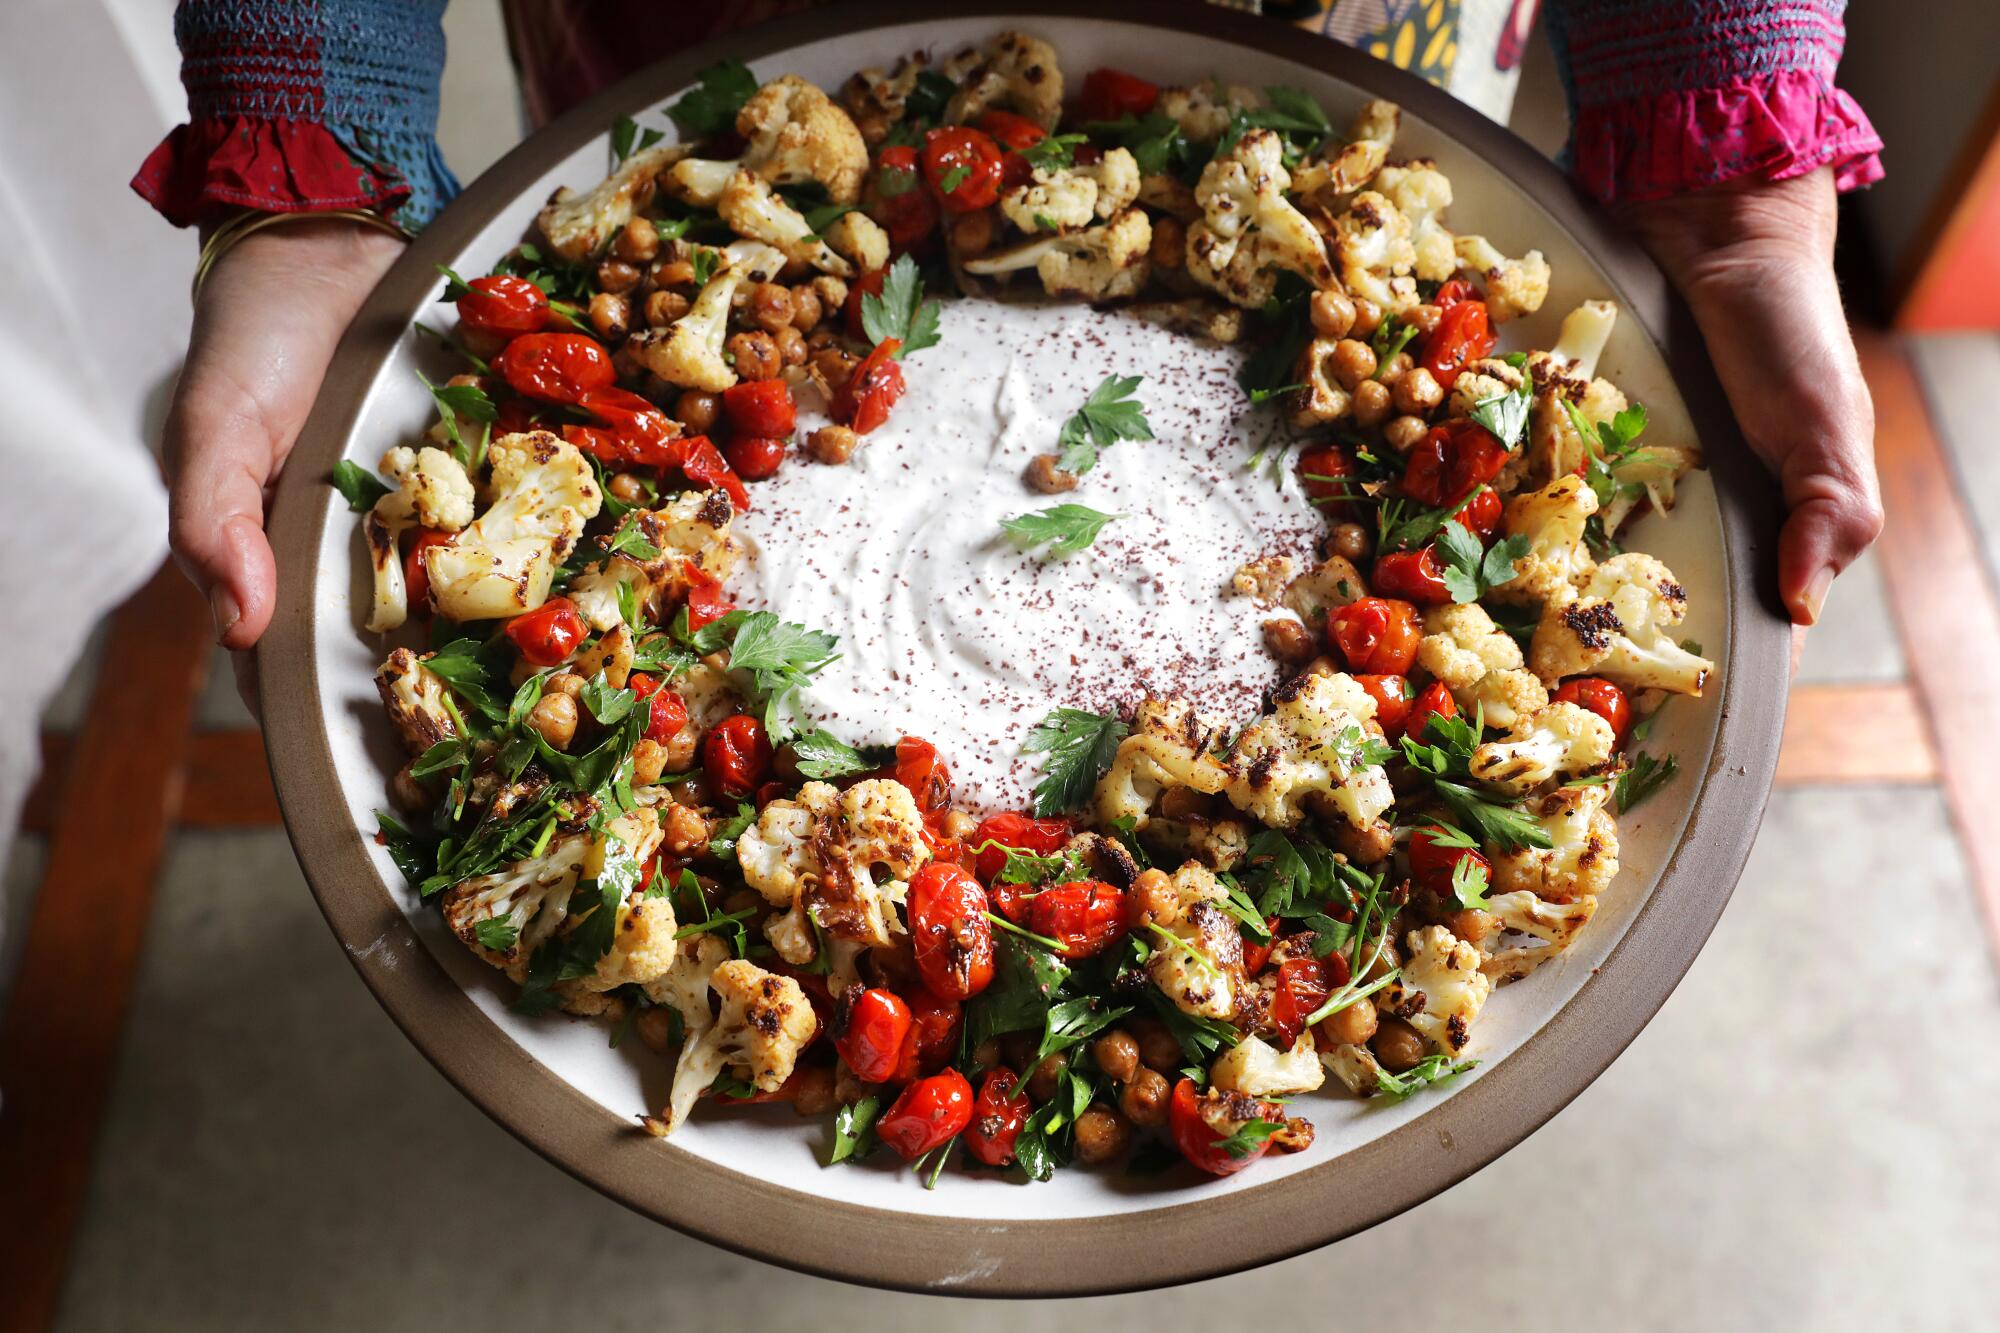 A platter of chickpeas, cauliflower and tomatoes with sumac yogurt in the center